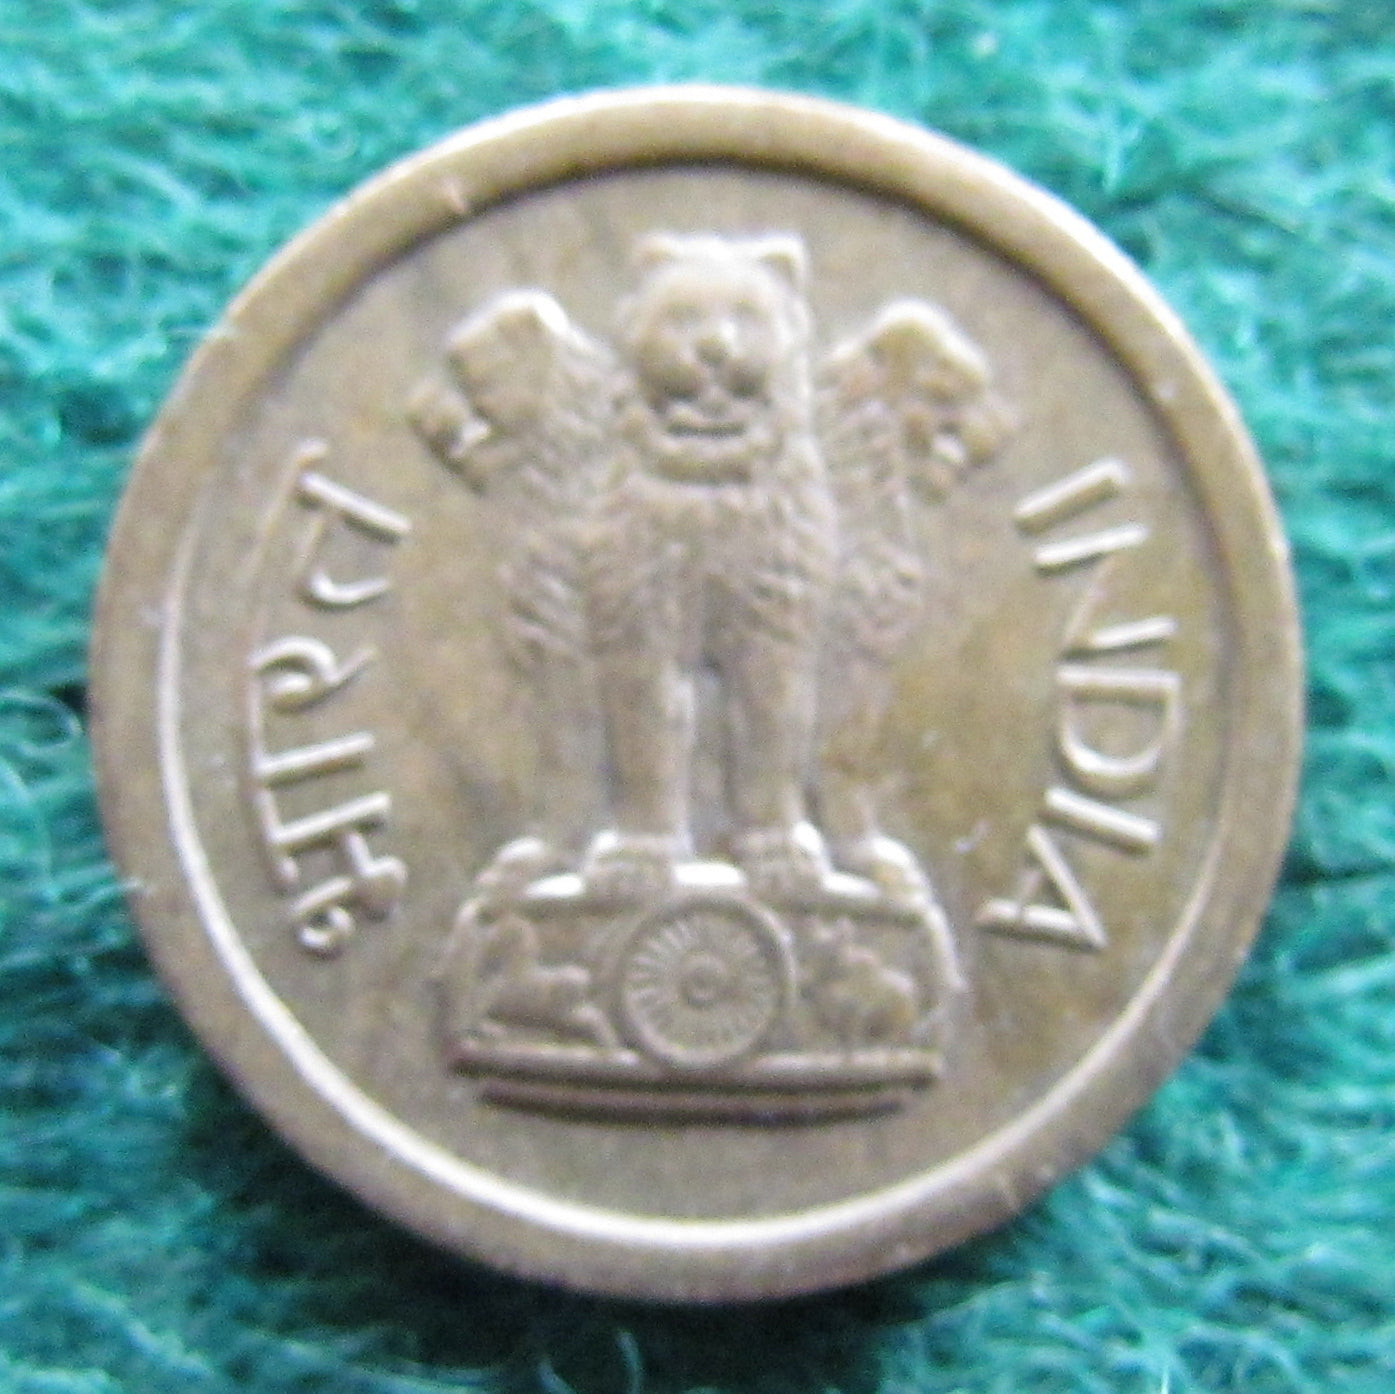 India 1963 1 Paise Coin